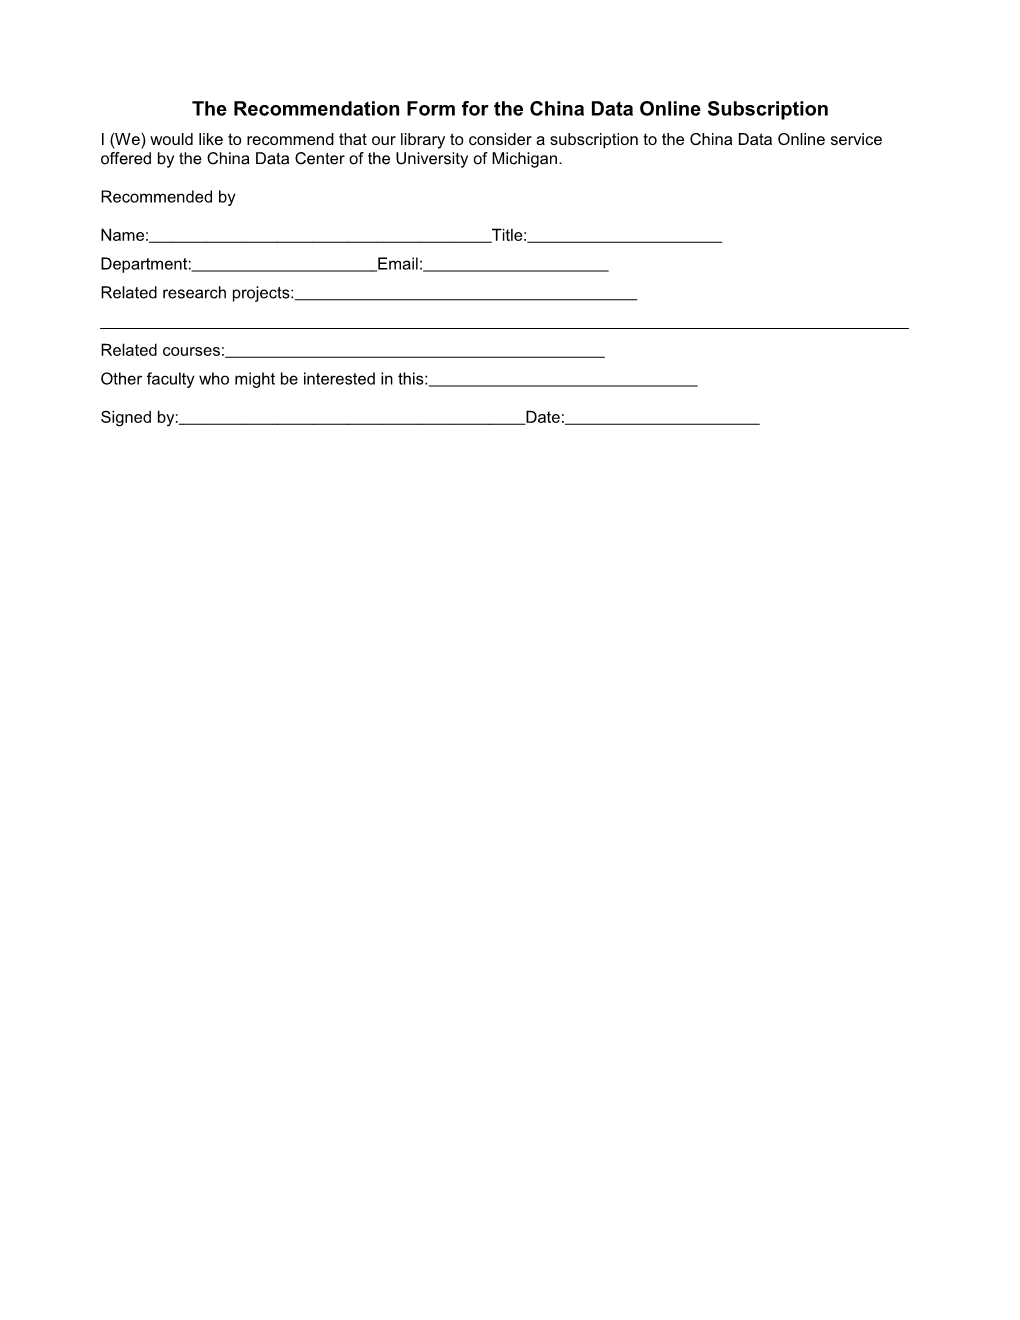 The Order Form for the China Data Online Subscription